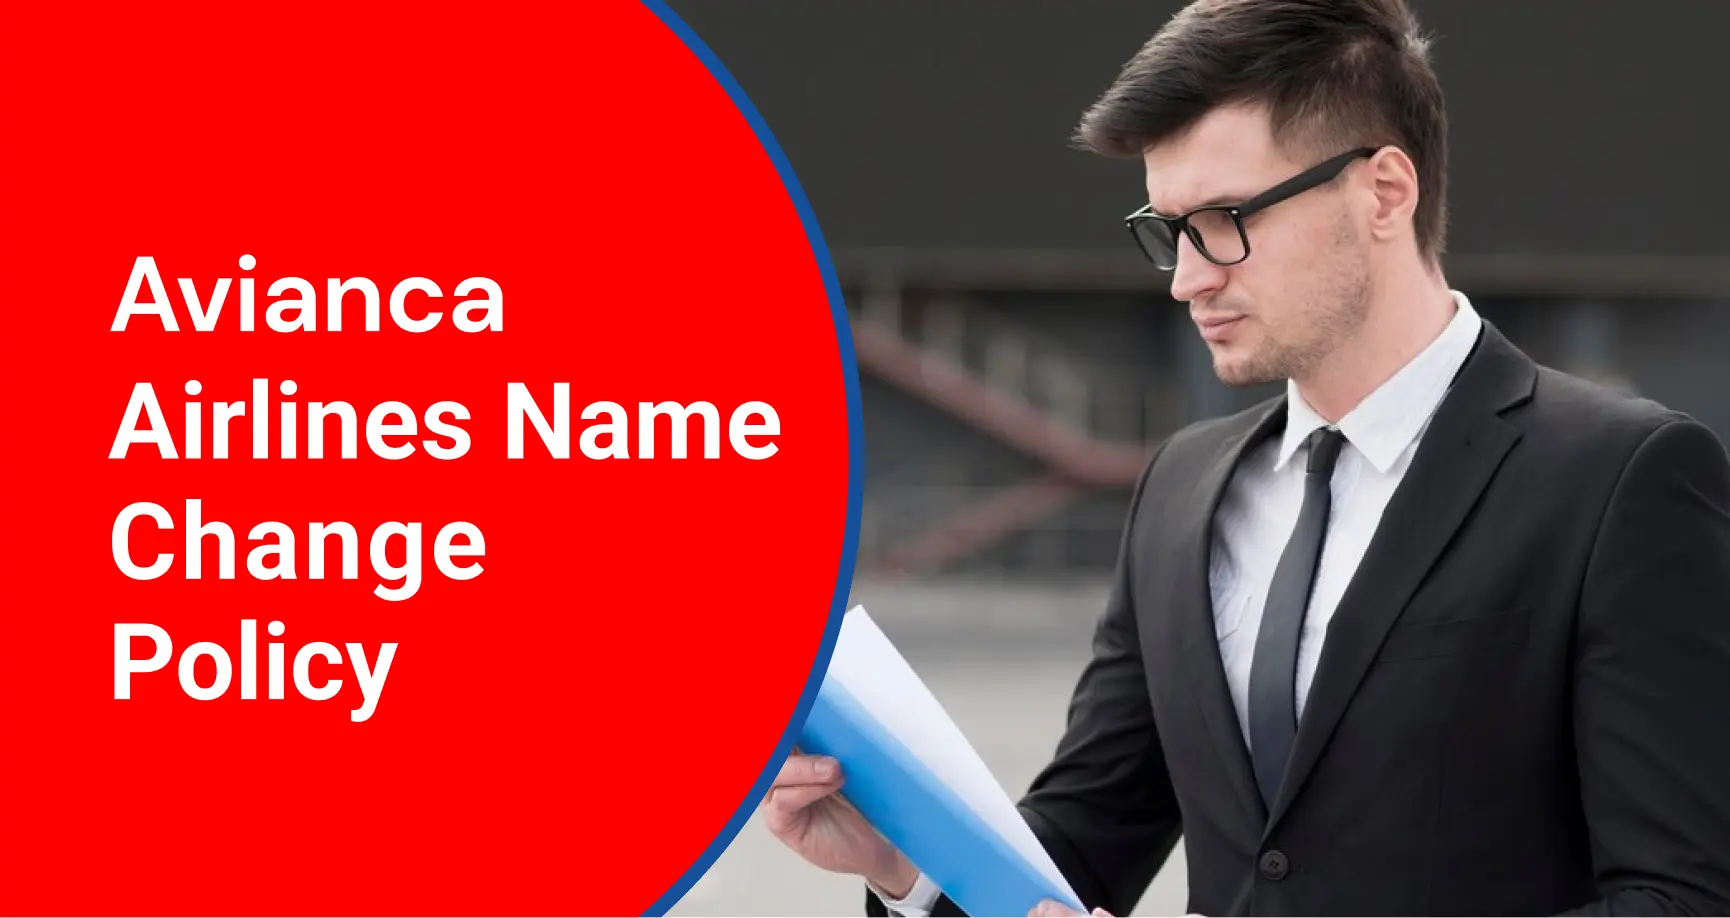 Avianca Airlines Name Change Policy